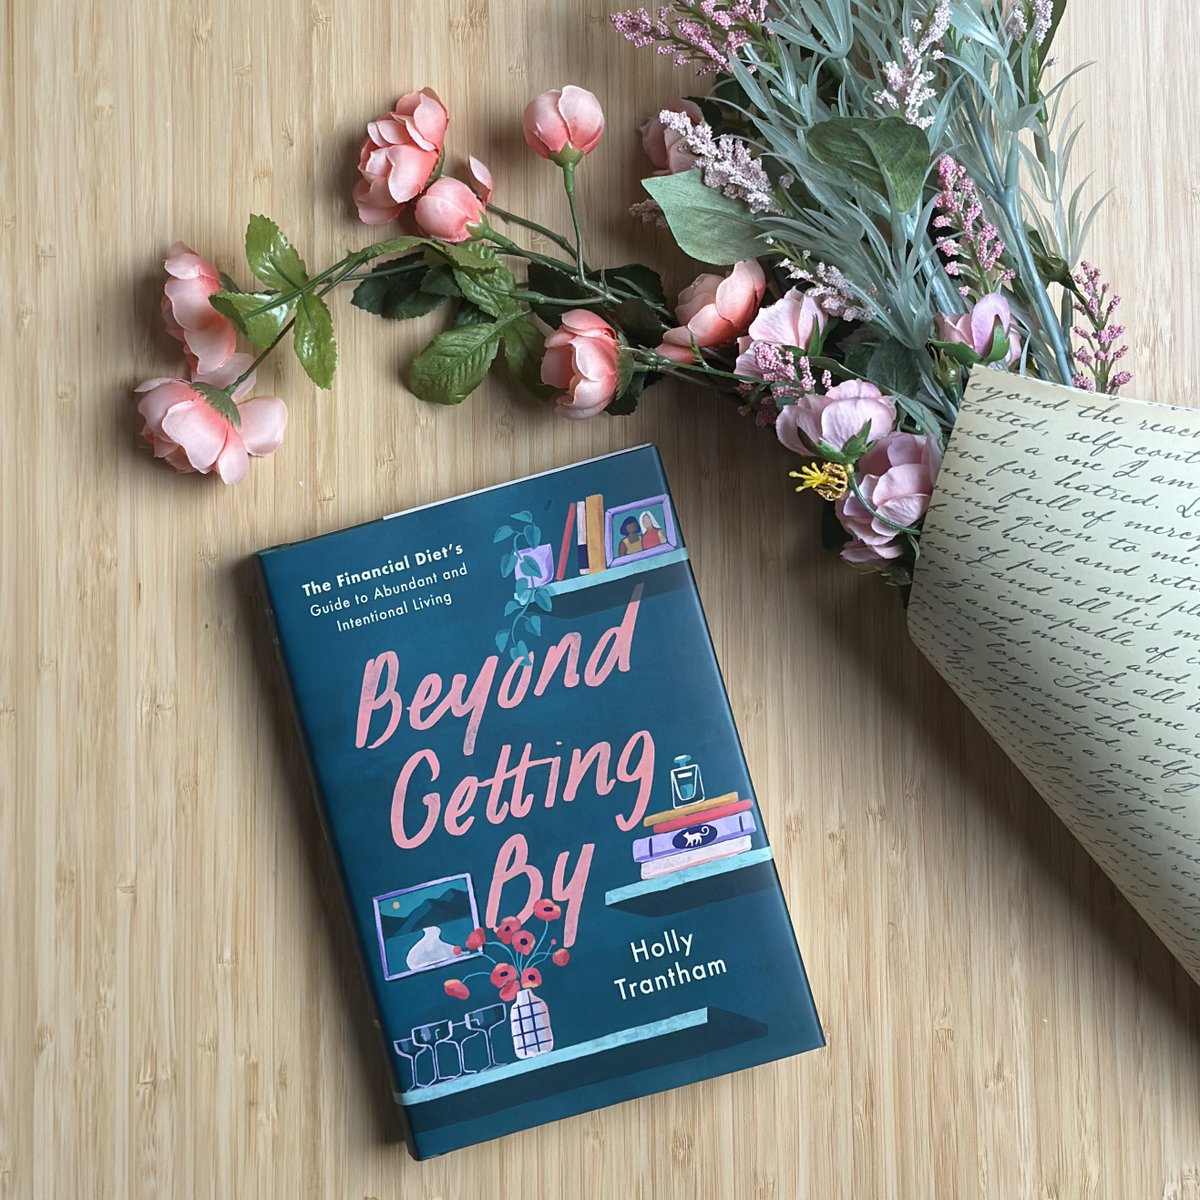 “BEYOND GETTING BY offers a supportive, loving, but deeply pragmatic older-sister style of advice that will leave readers feeling inspired, challenged, & motivated to improve their lives.”—Erin Lowry BEYOND GETTING BY is out today—learn more at the link! penguinrandomhouse.com/books/738110/b…